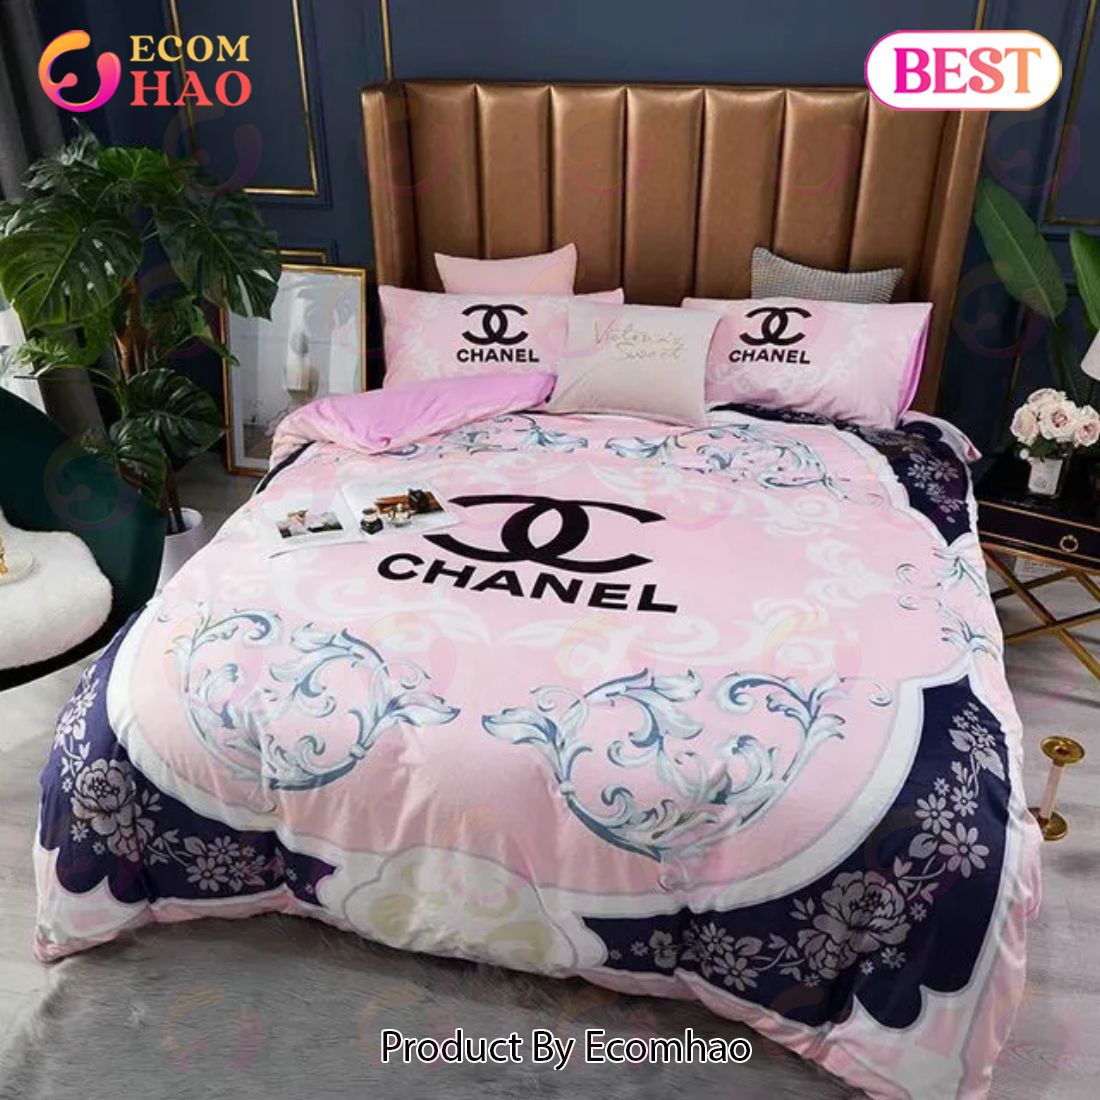 Chanel Beautiful Flowers Bedding 3D Printed Bedding Sets Quilt Sets Duvet  Cover Luxury Brand Bedding Decor Bedroom Sets Best Luxury Bed Sets Gift  Thankgivings And Christmas - Ecomhao Store